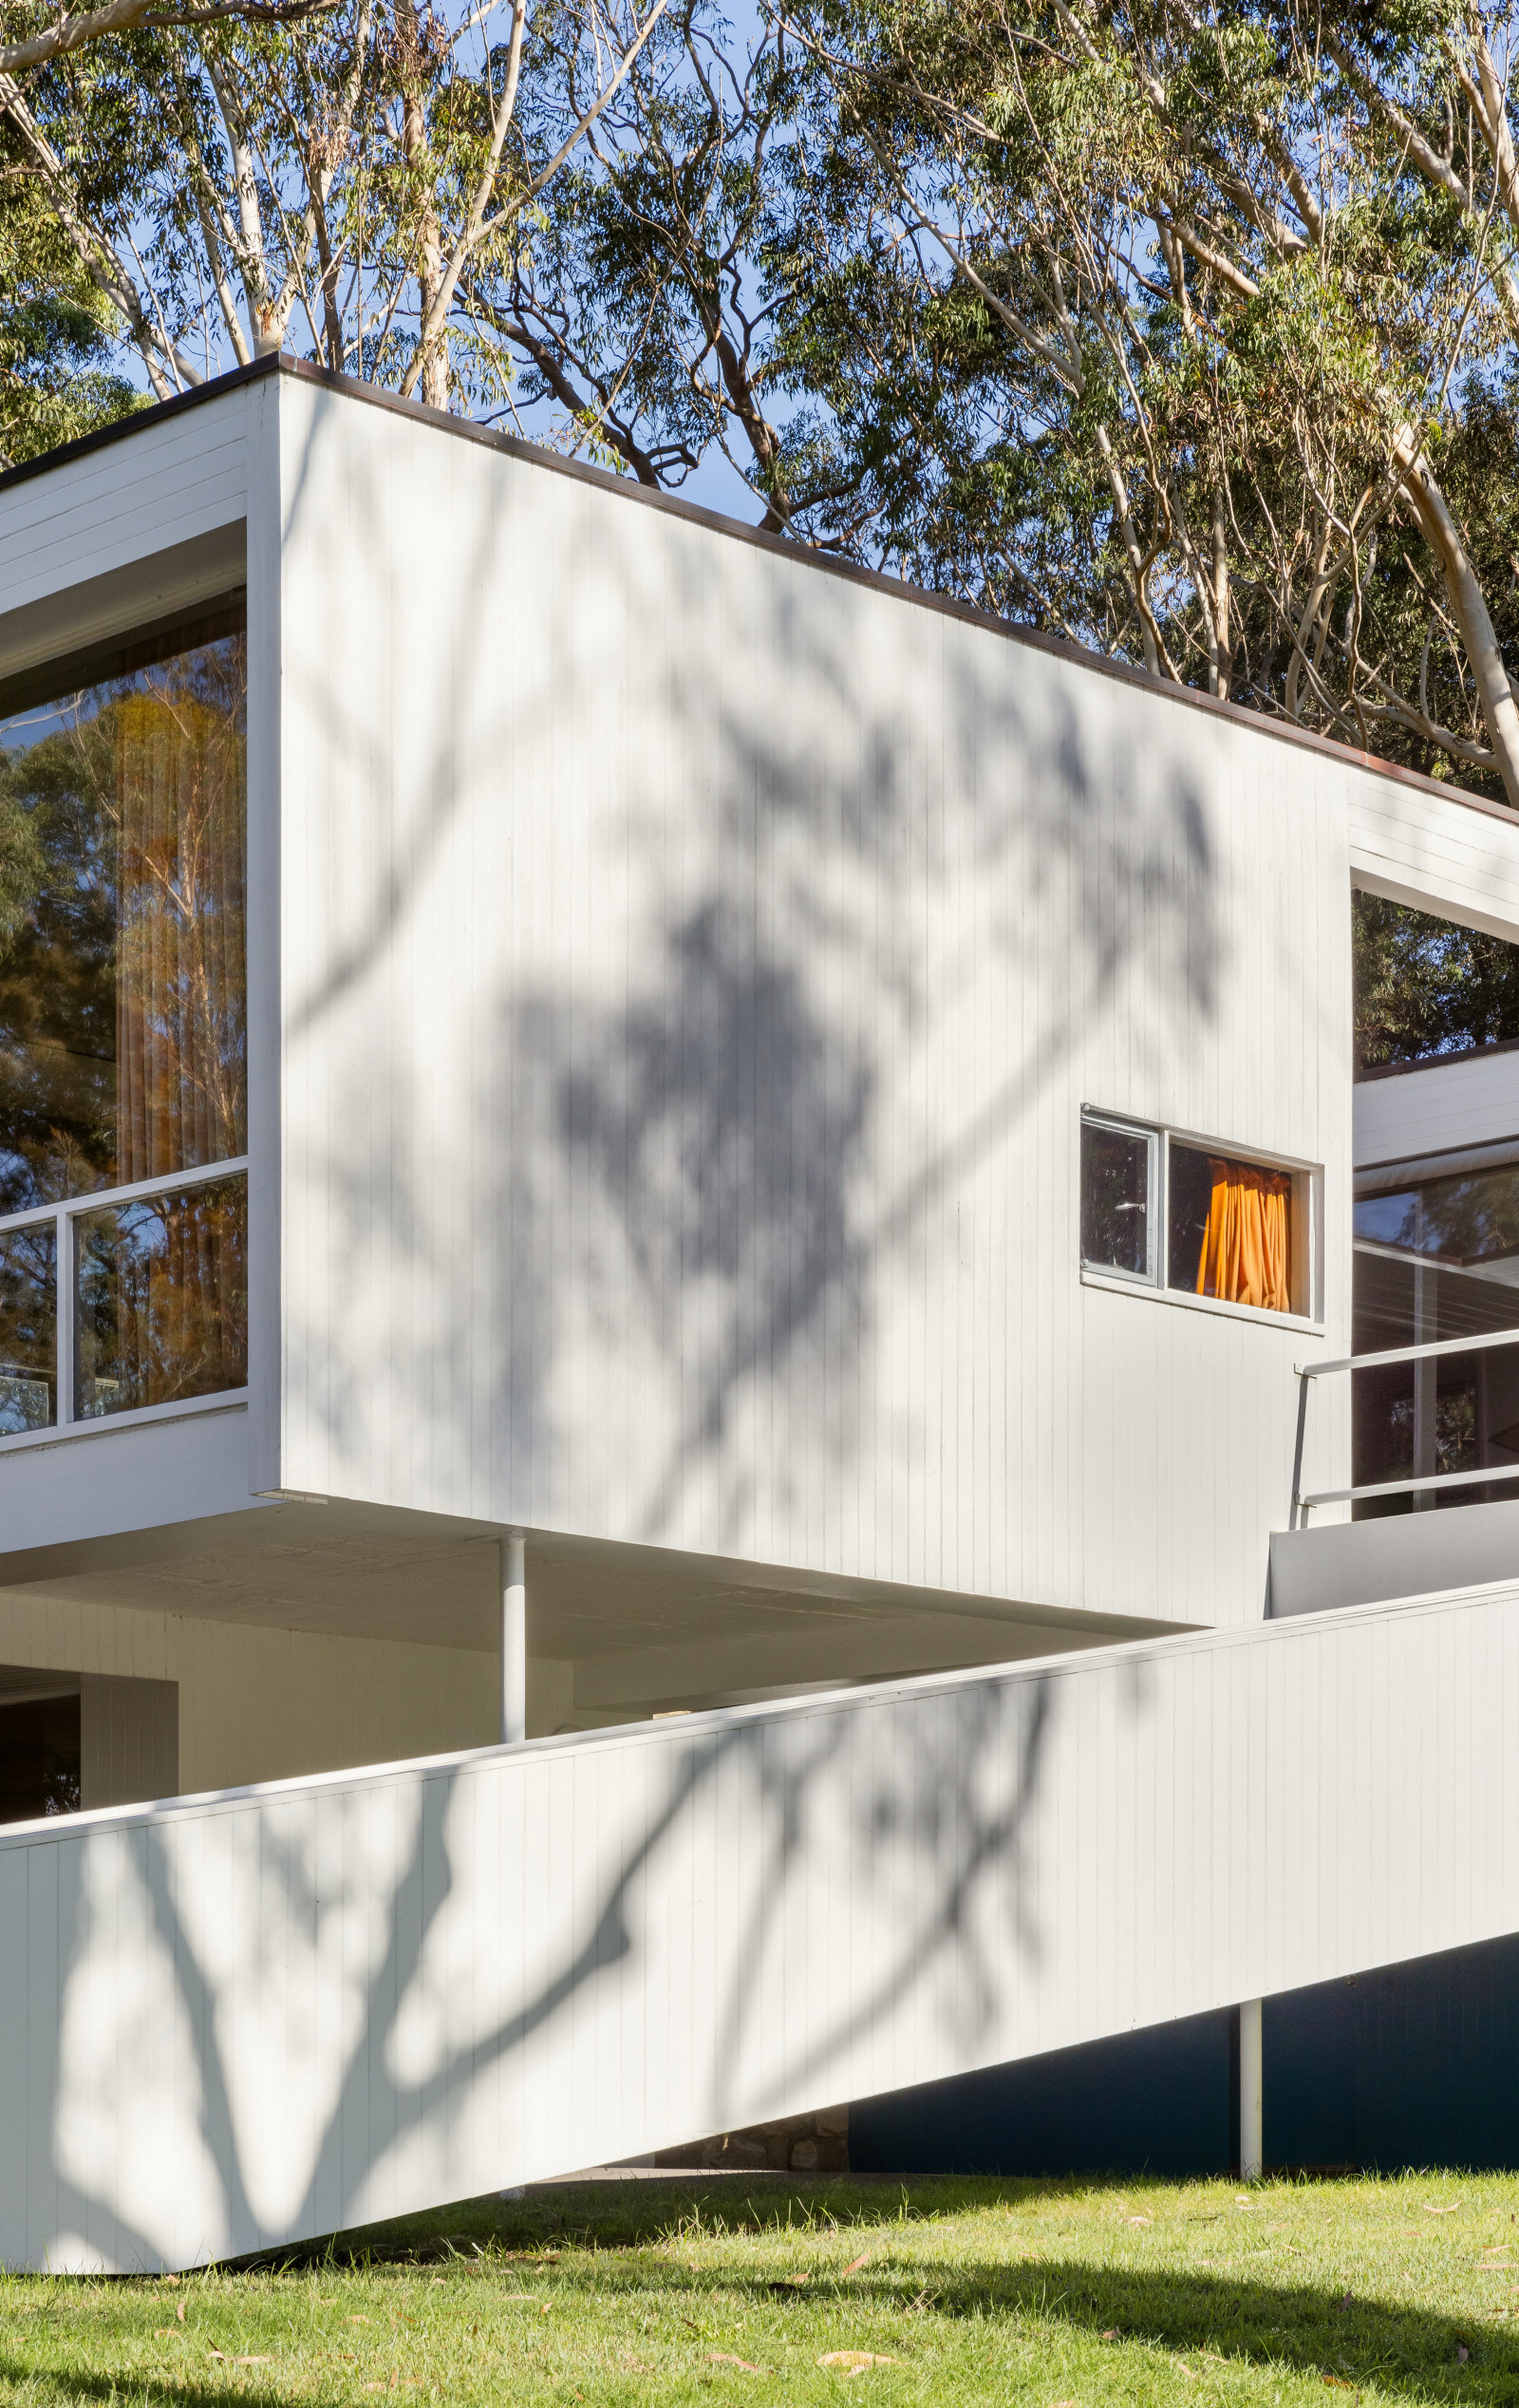 Exterior view of Rose Seidler House, showing side access ramp